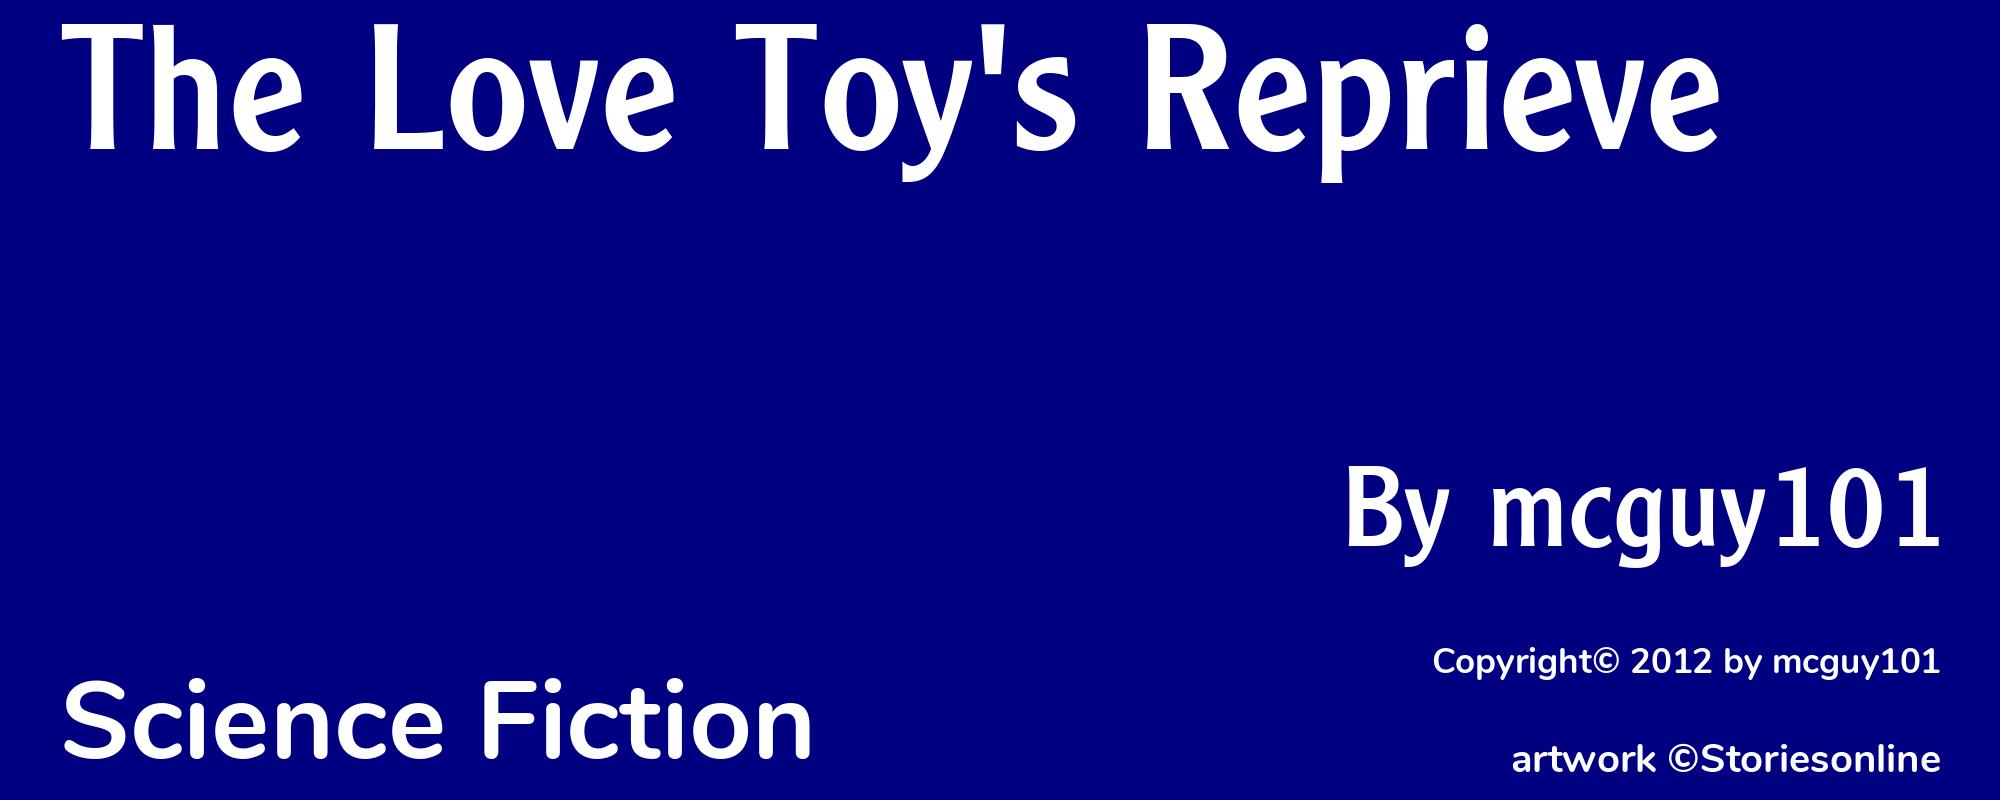 The Love Toy's Reprieve - Cover